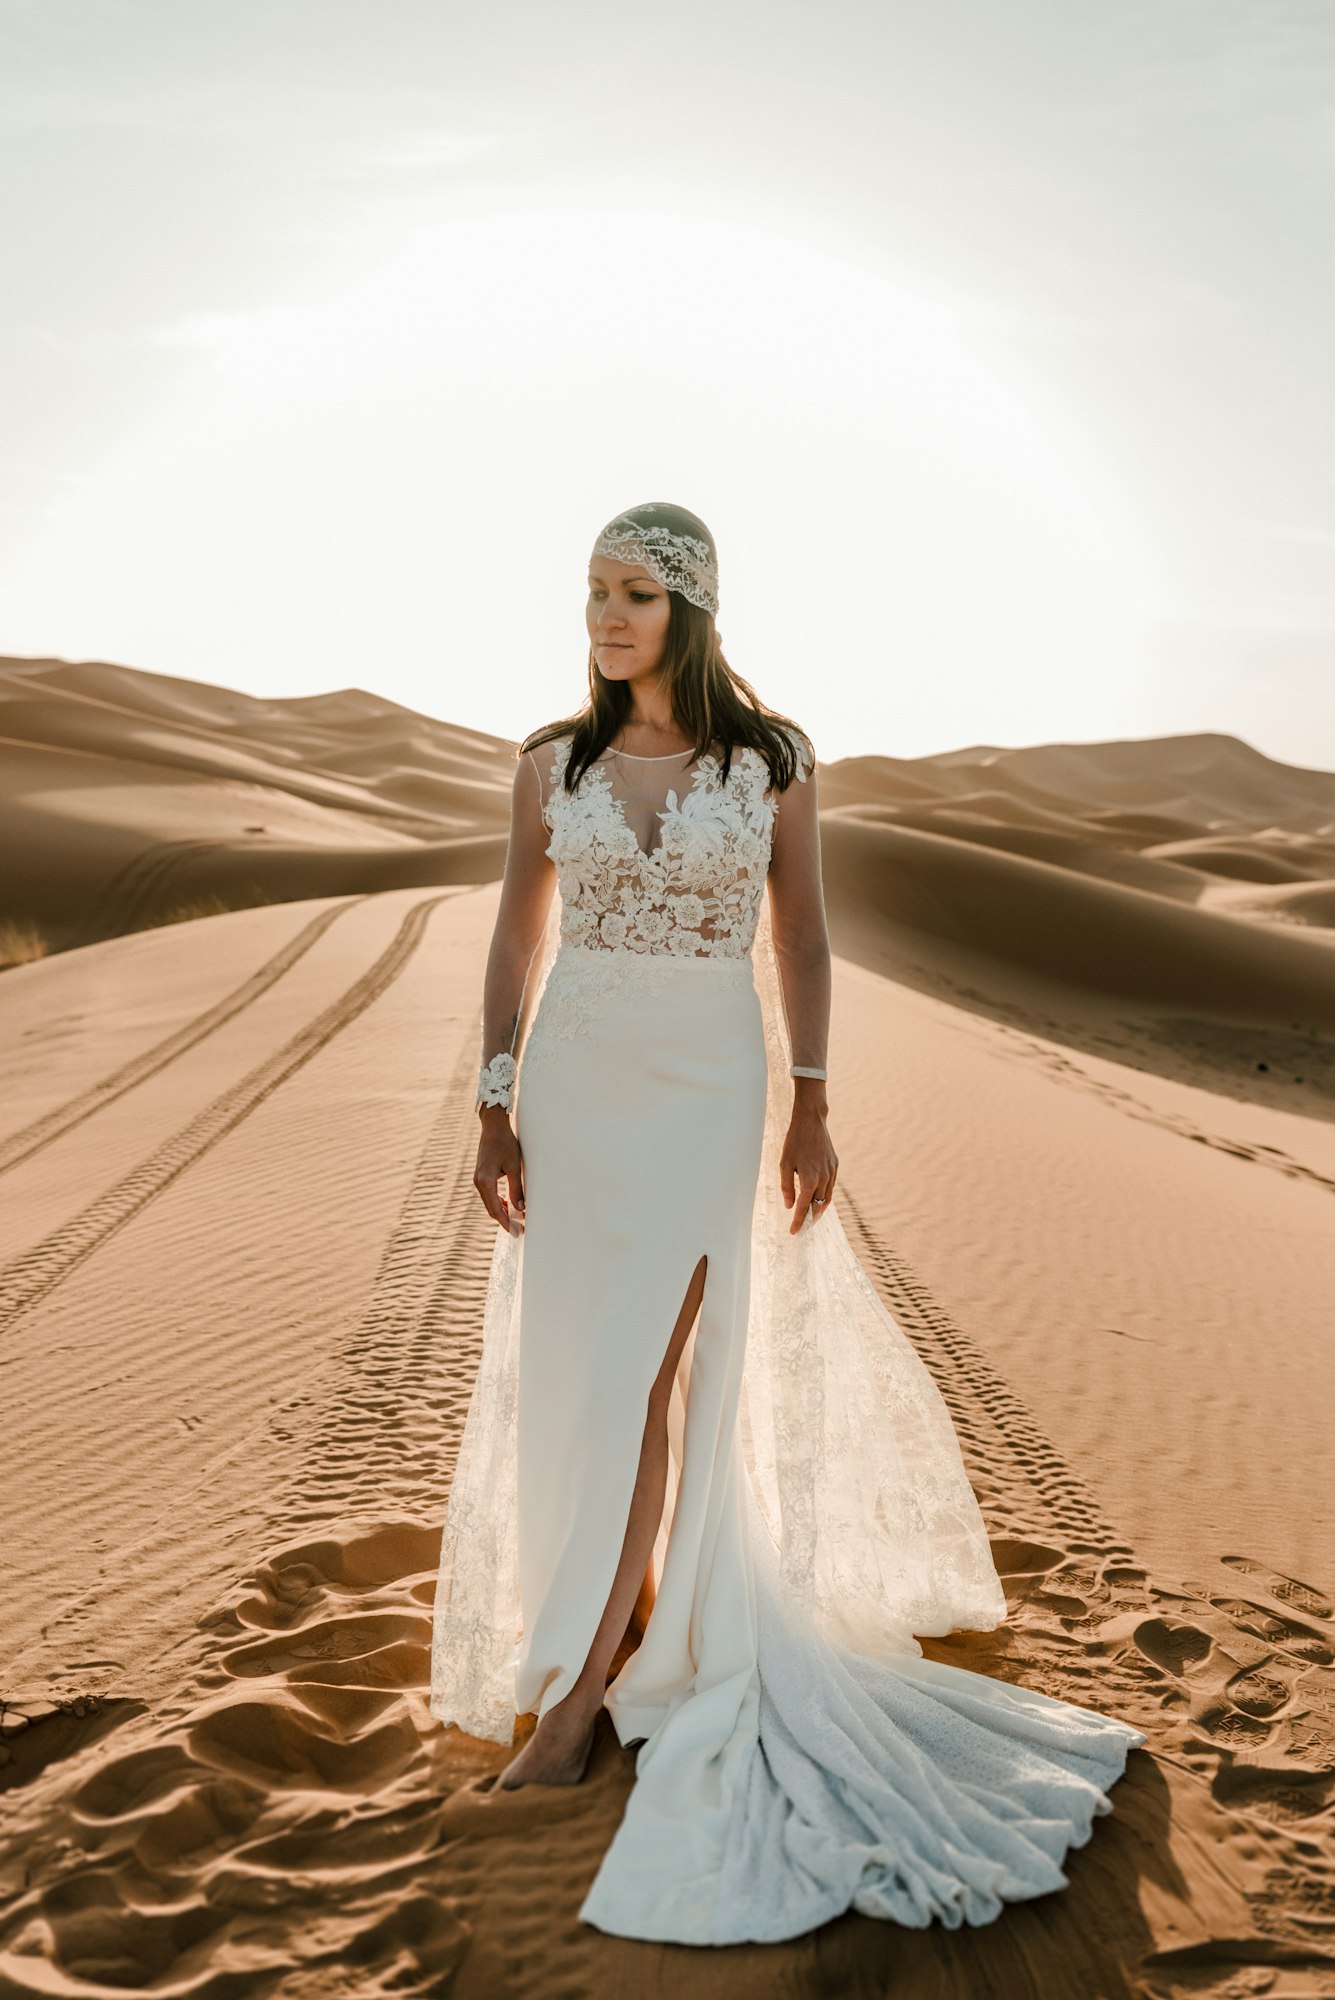 A woman in a wedding dress in the desert